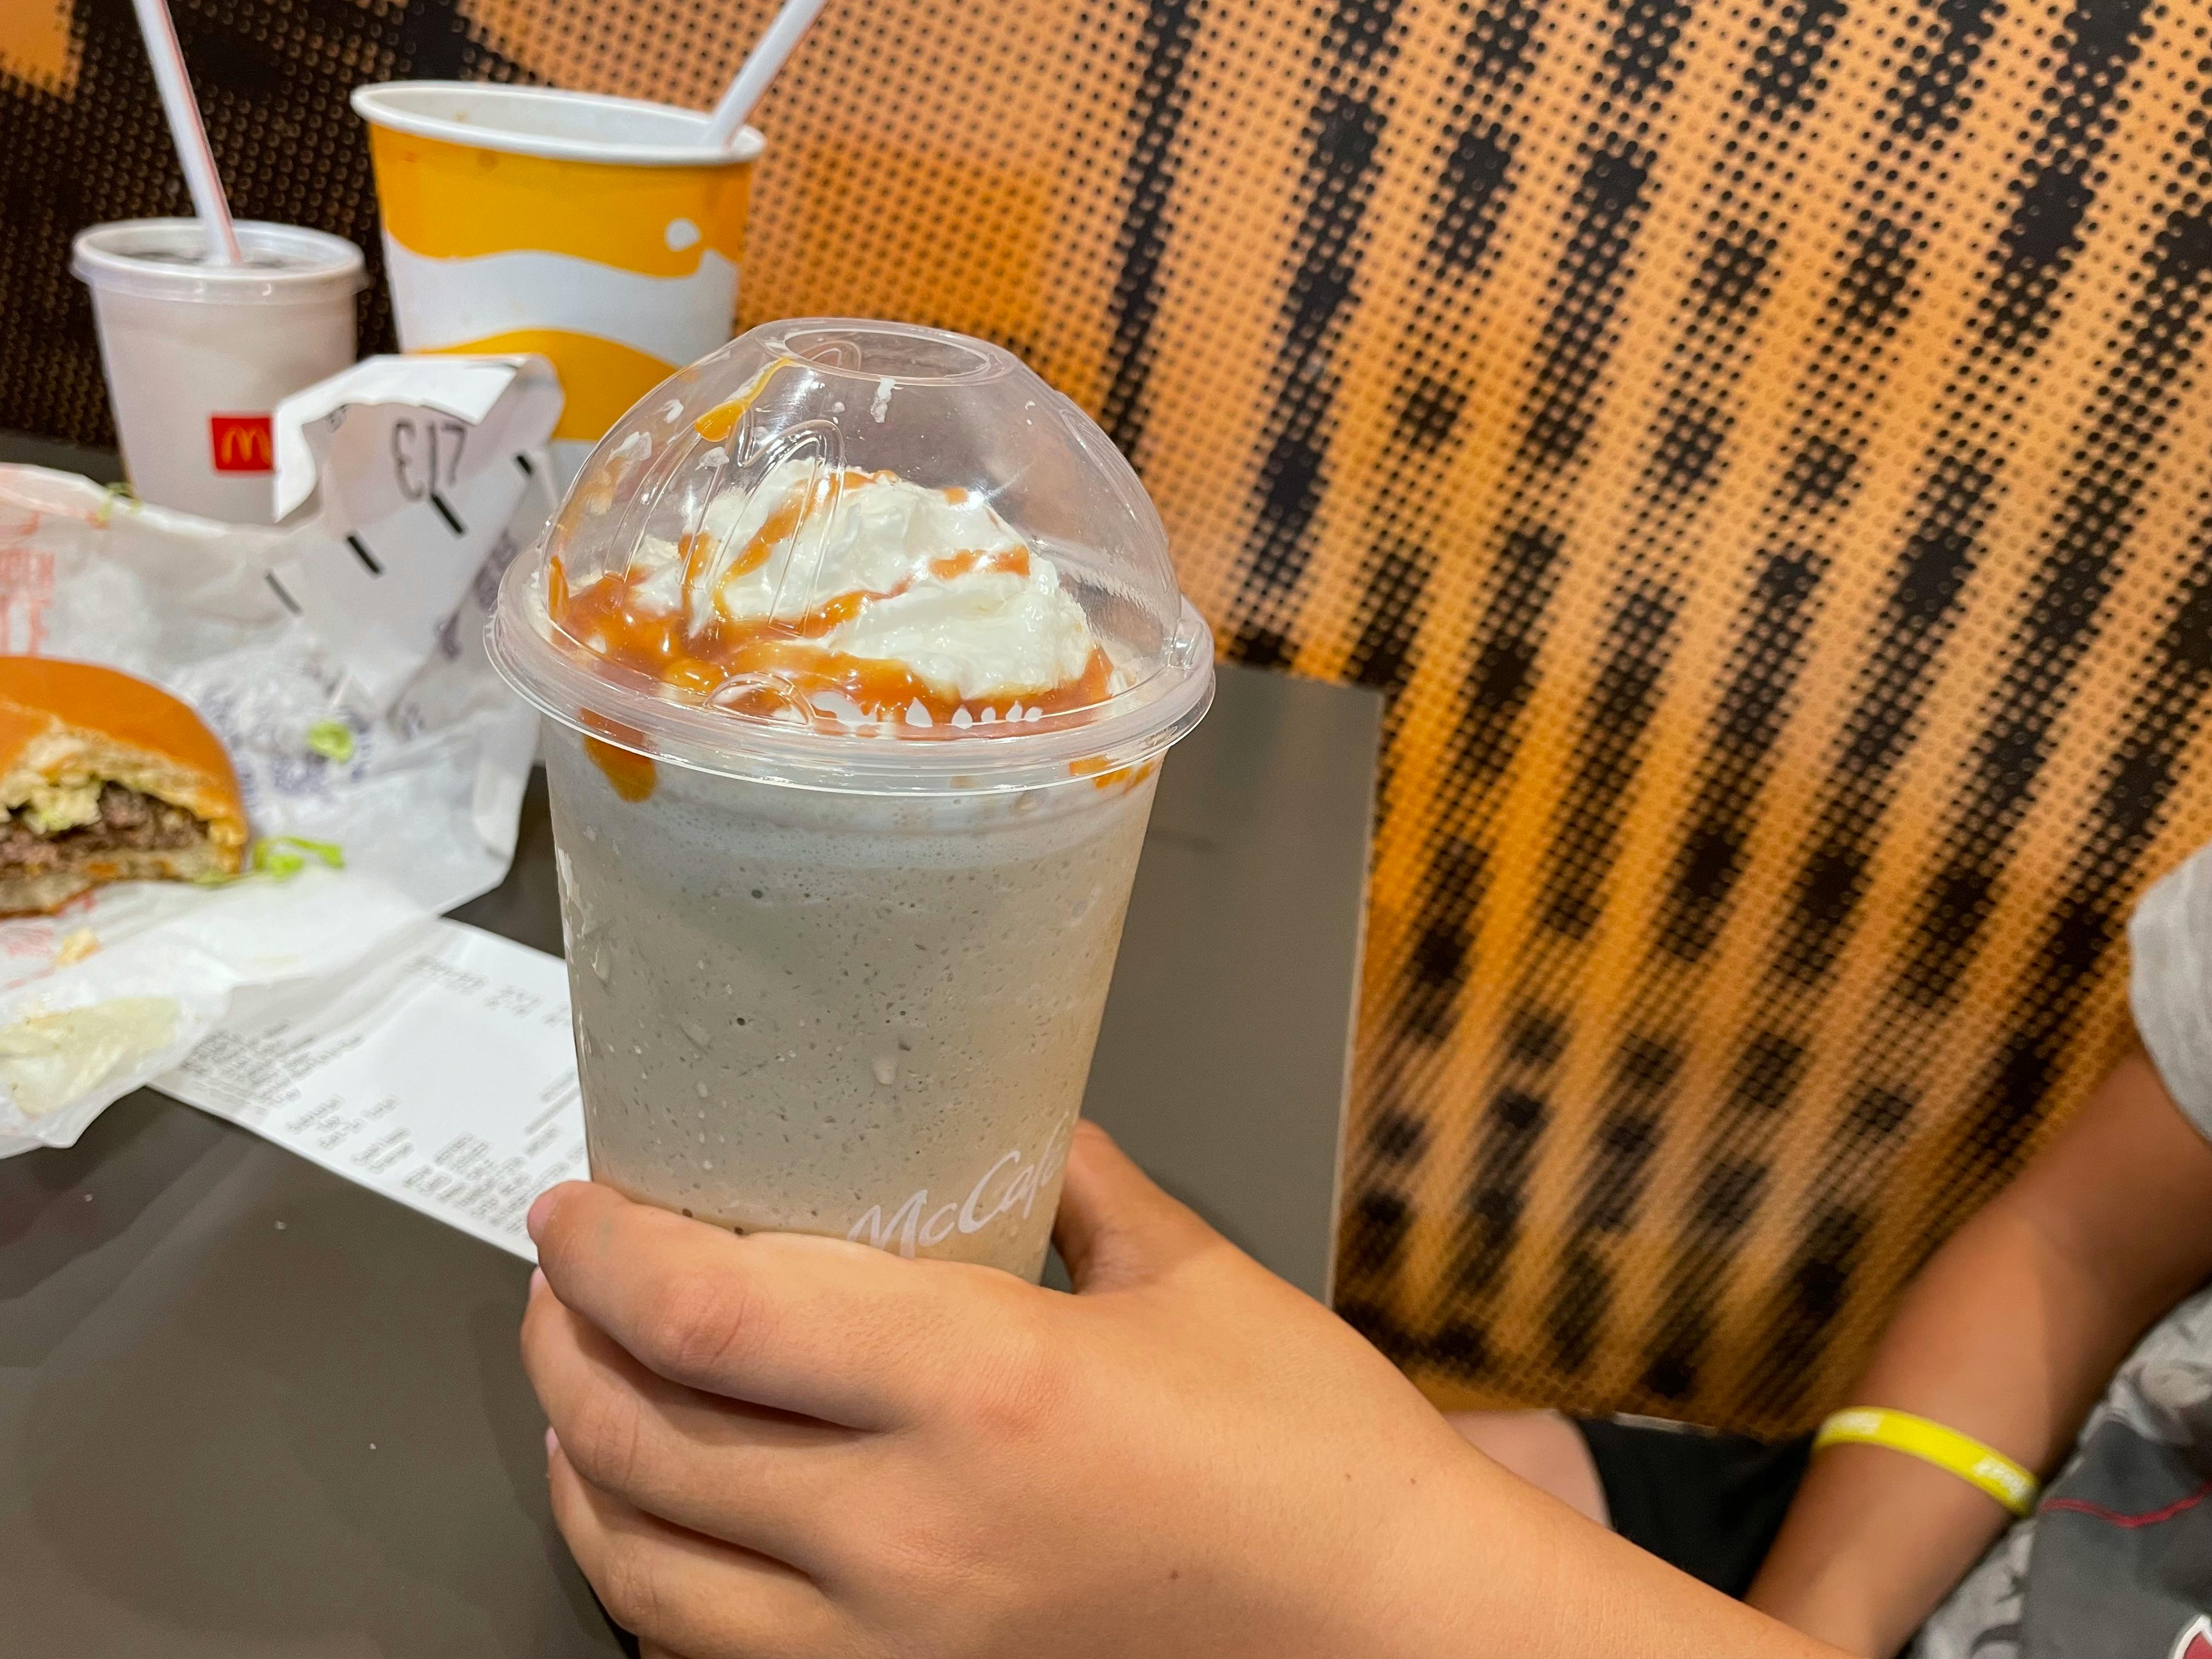 A person holding a McDonald's large caramel frappe while sitting at a table inside McDonald's.